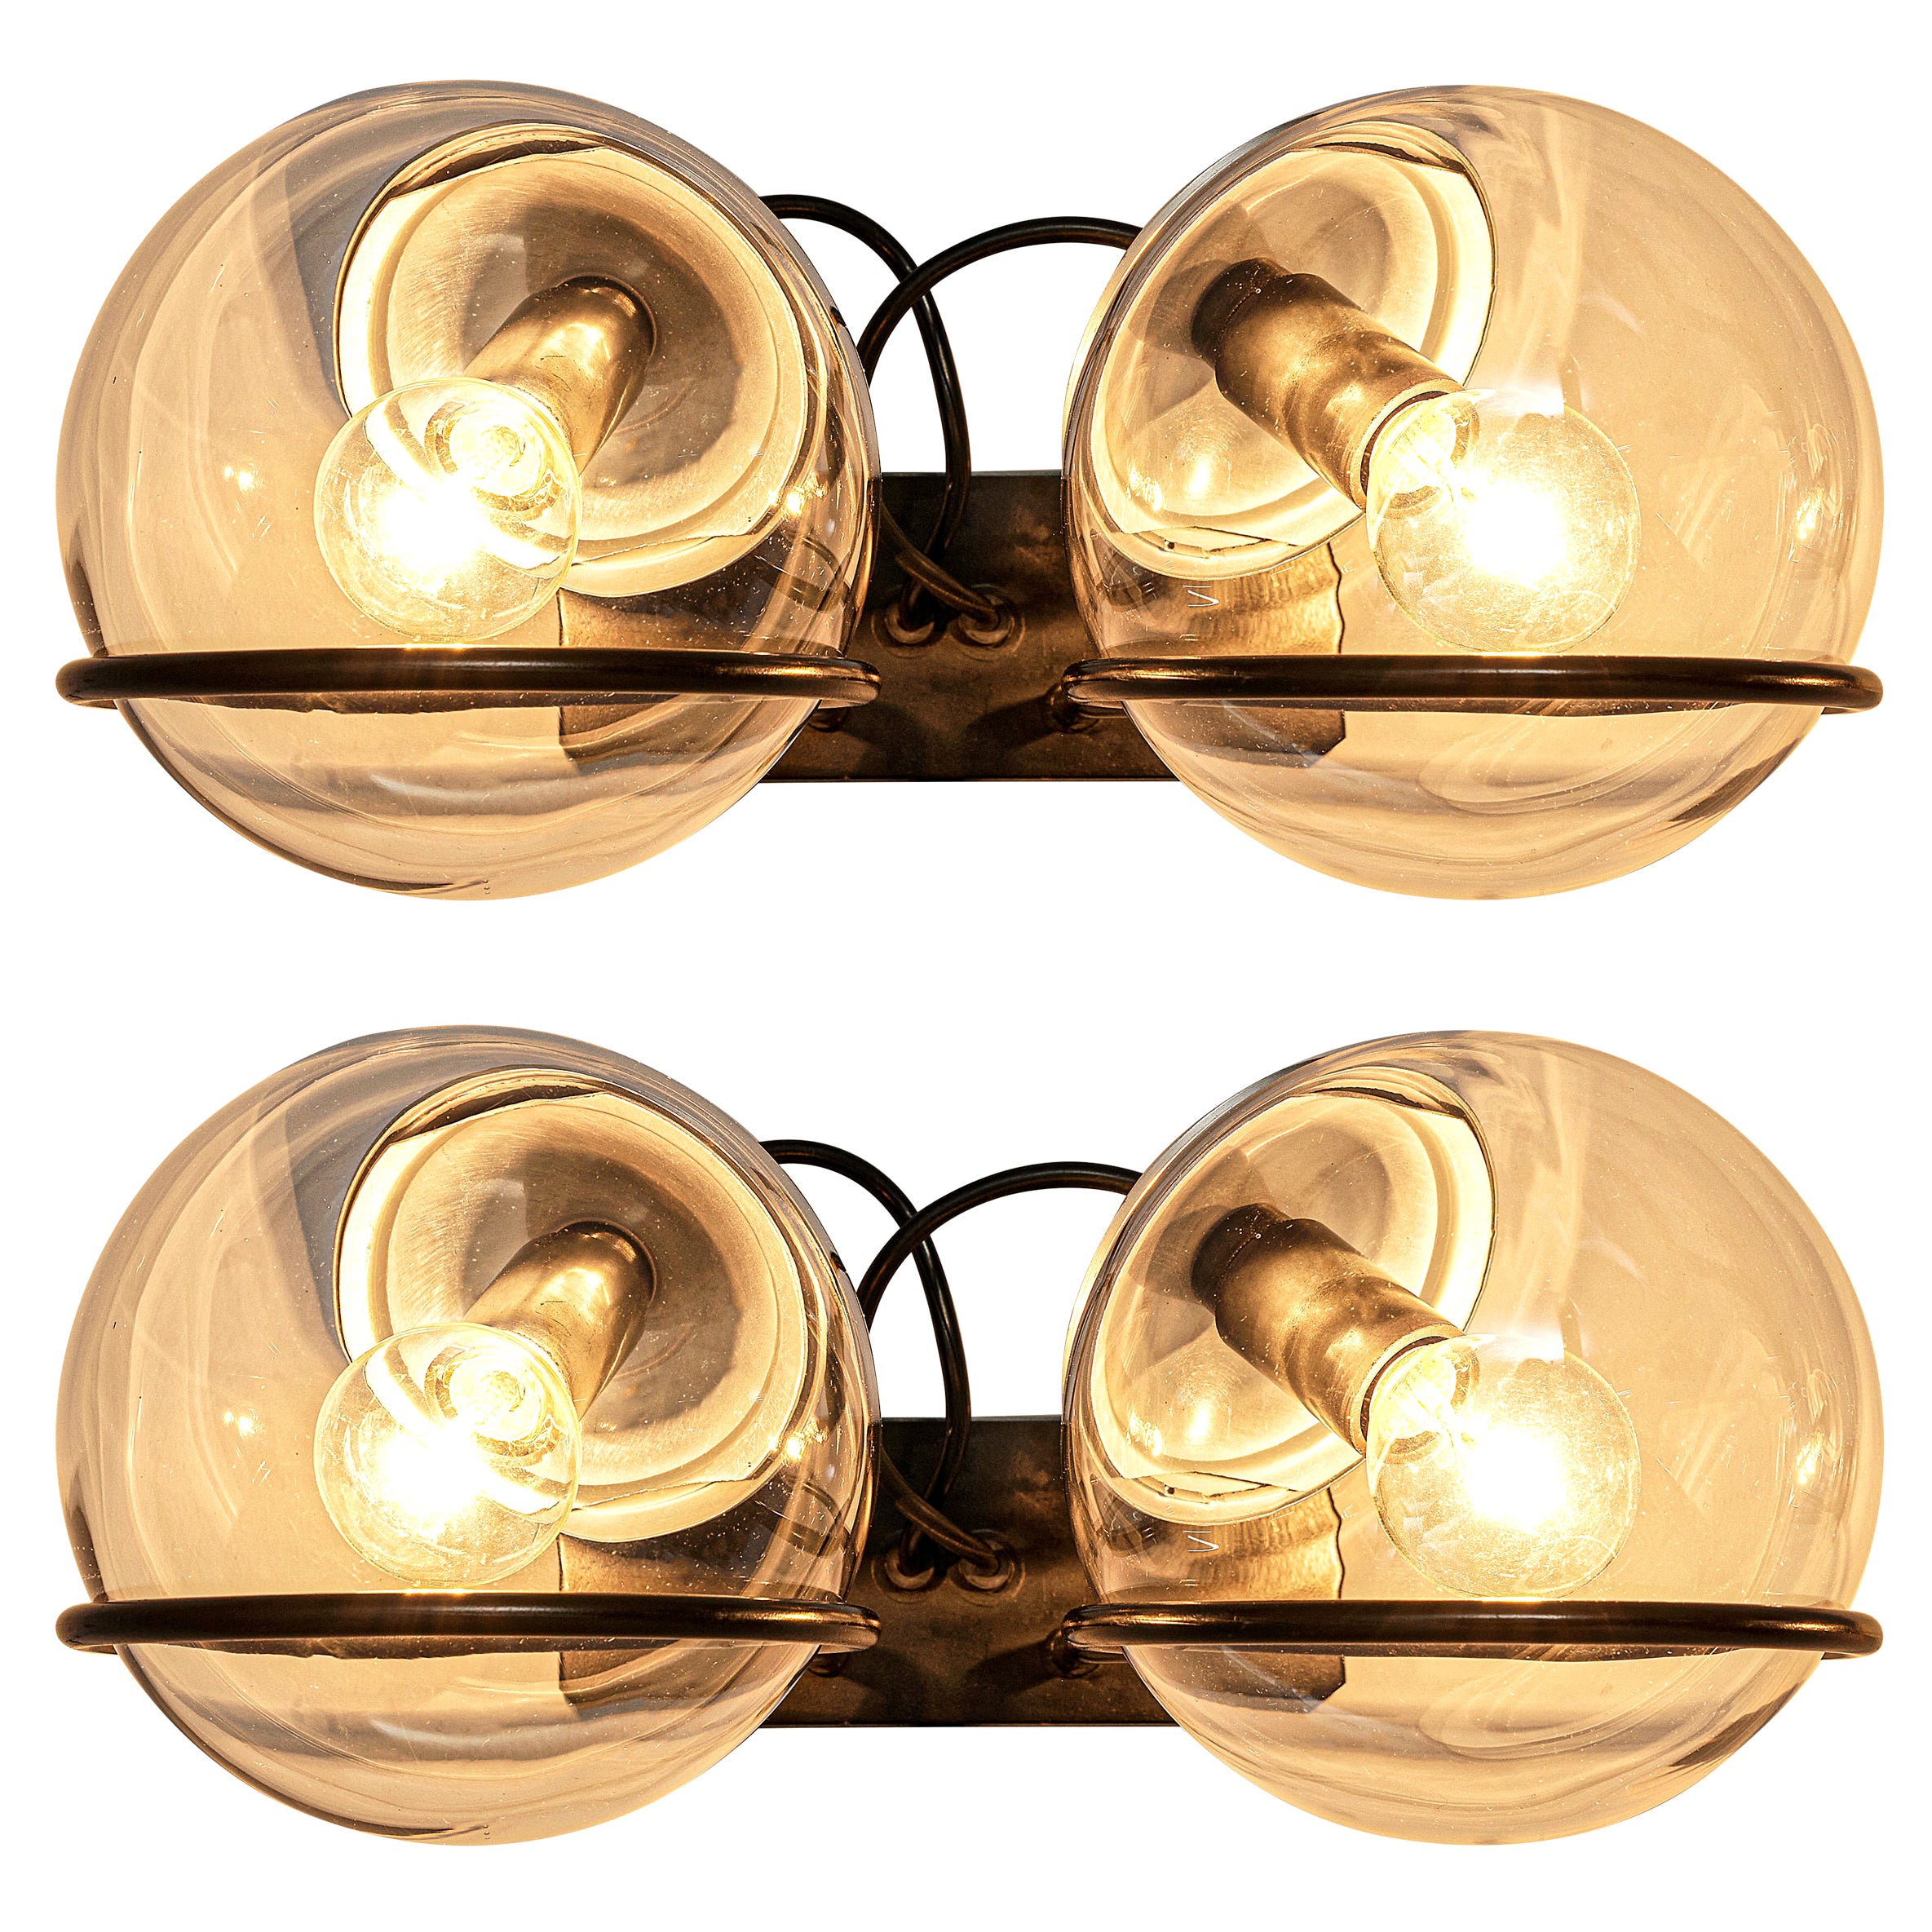 Gino Sarfatti for Arteluce Pair of Wall Lights Model '237' in Glass and Metal